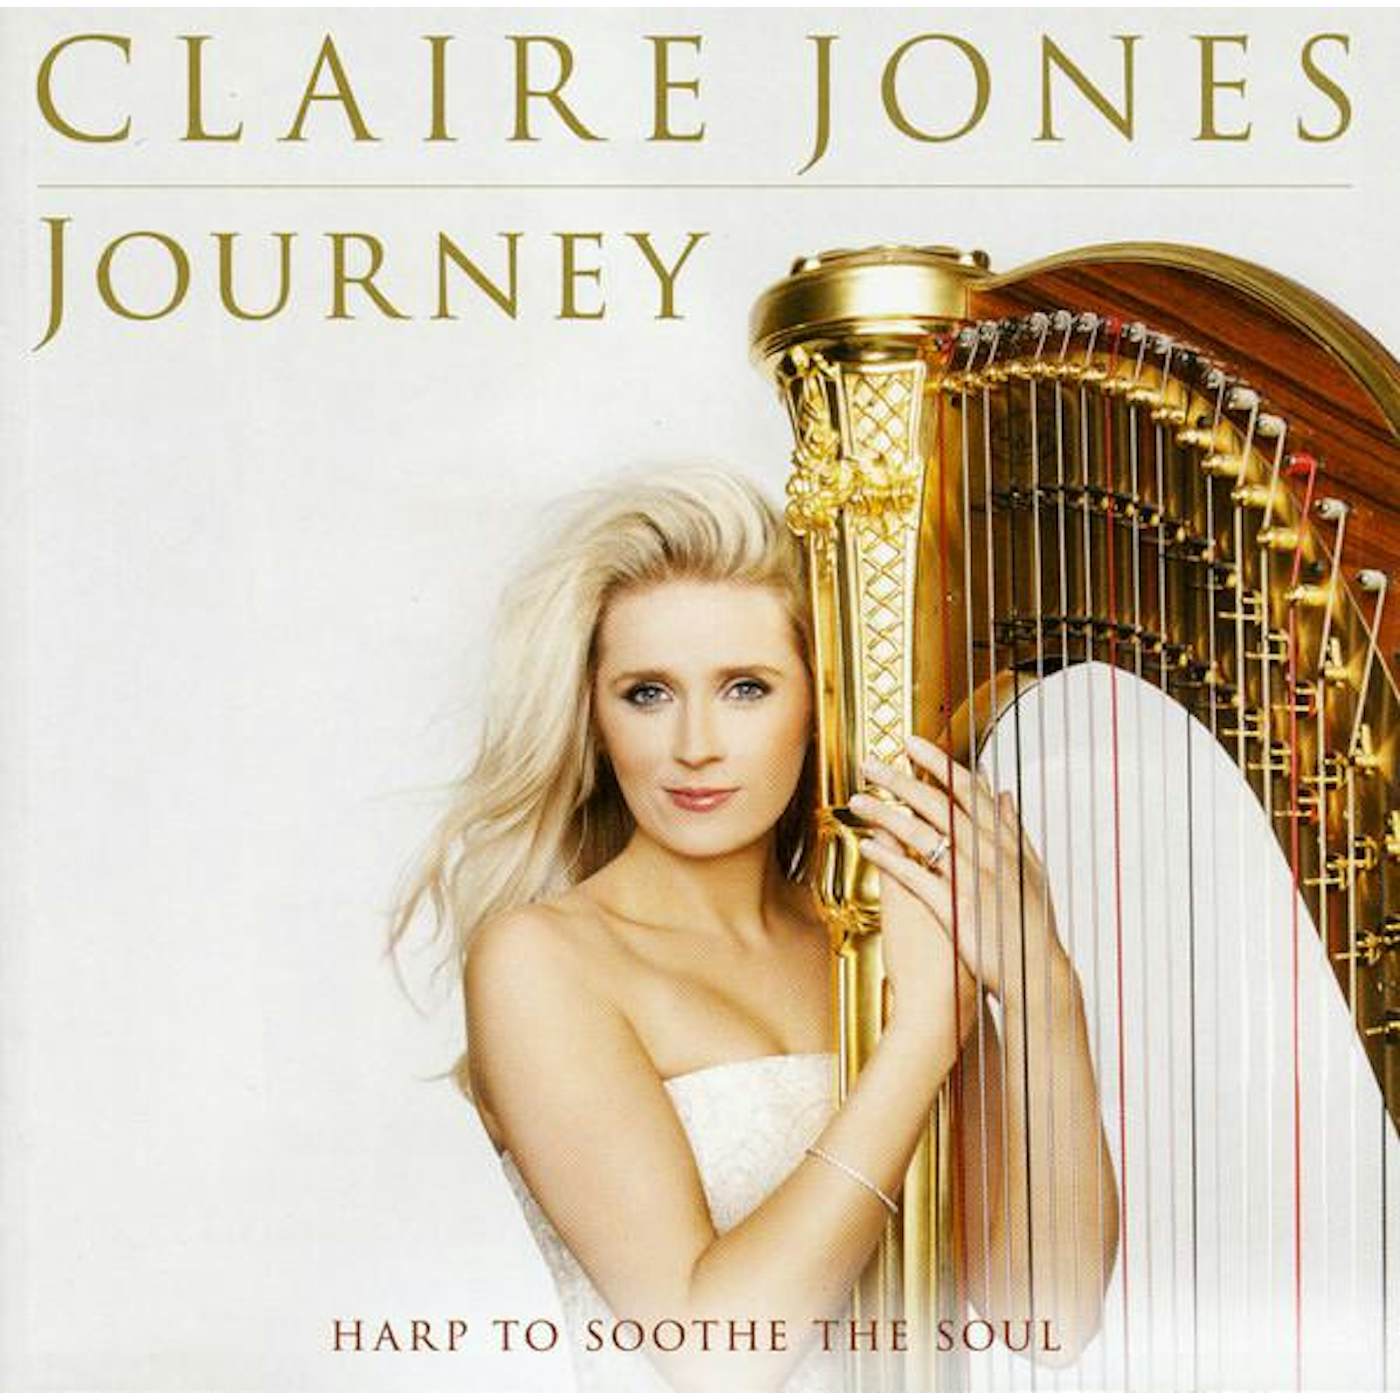 Claire Jones JOURNEY HARP TO SOOTHE THE SOUL CD